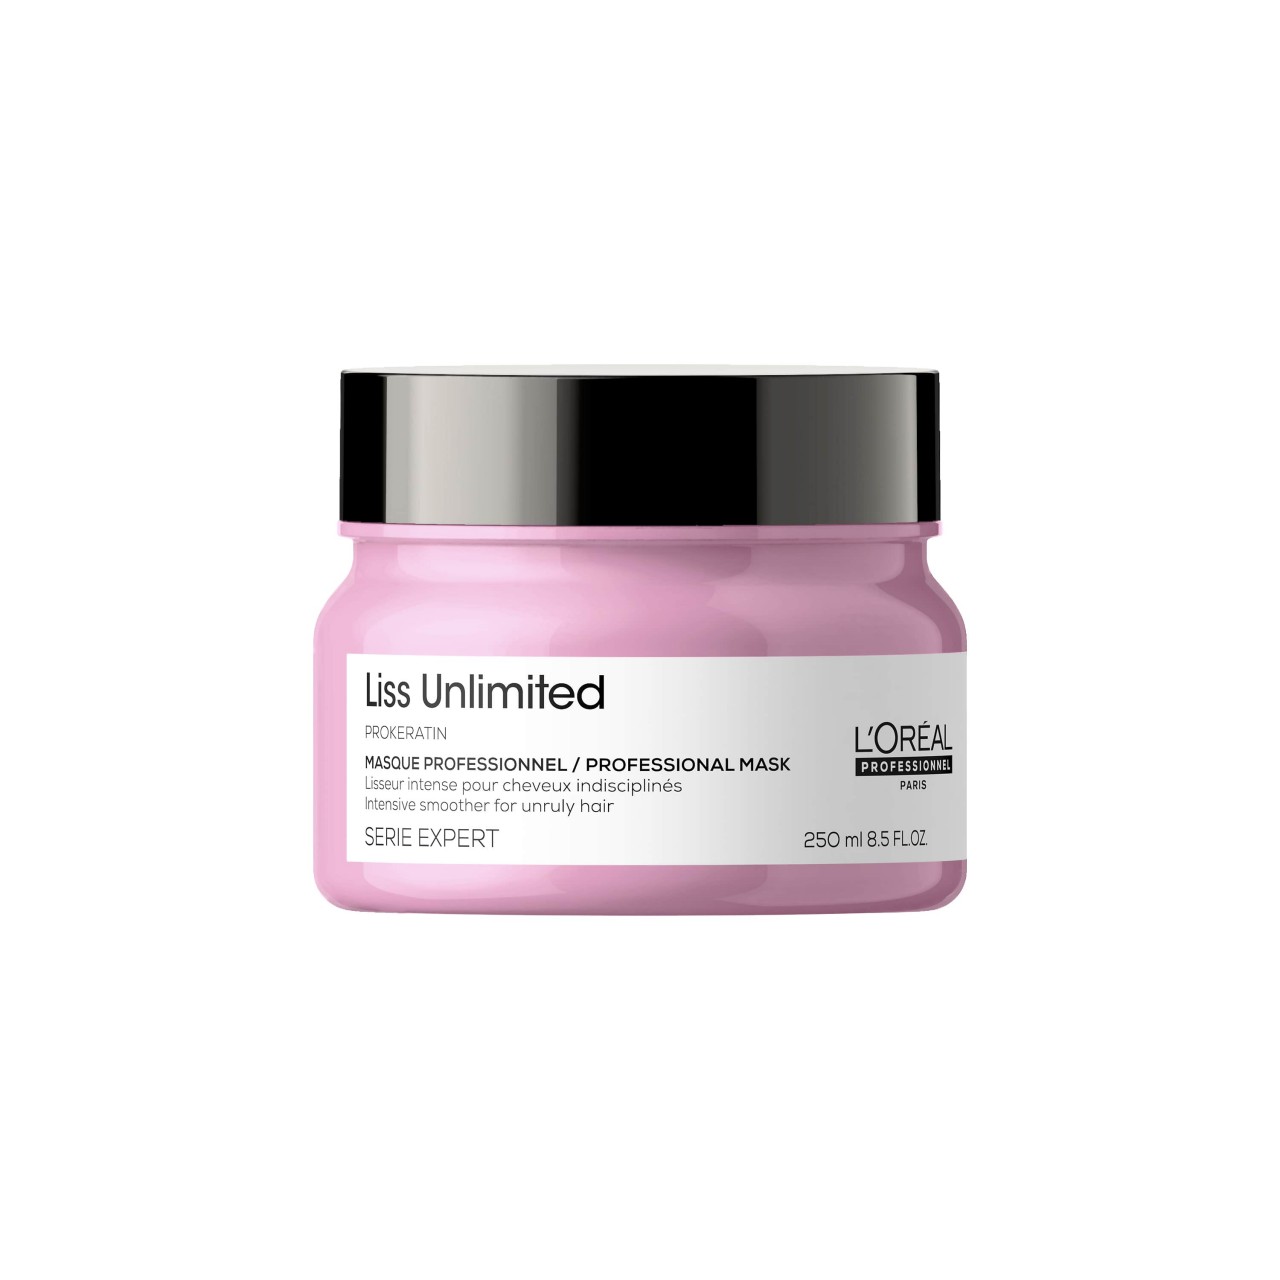 L'Oreal Professionnel - Liss Unlimited Hair Mask - 